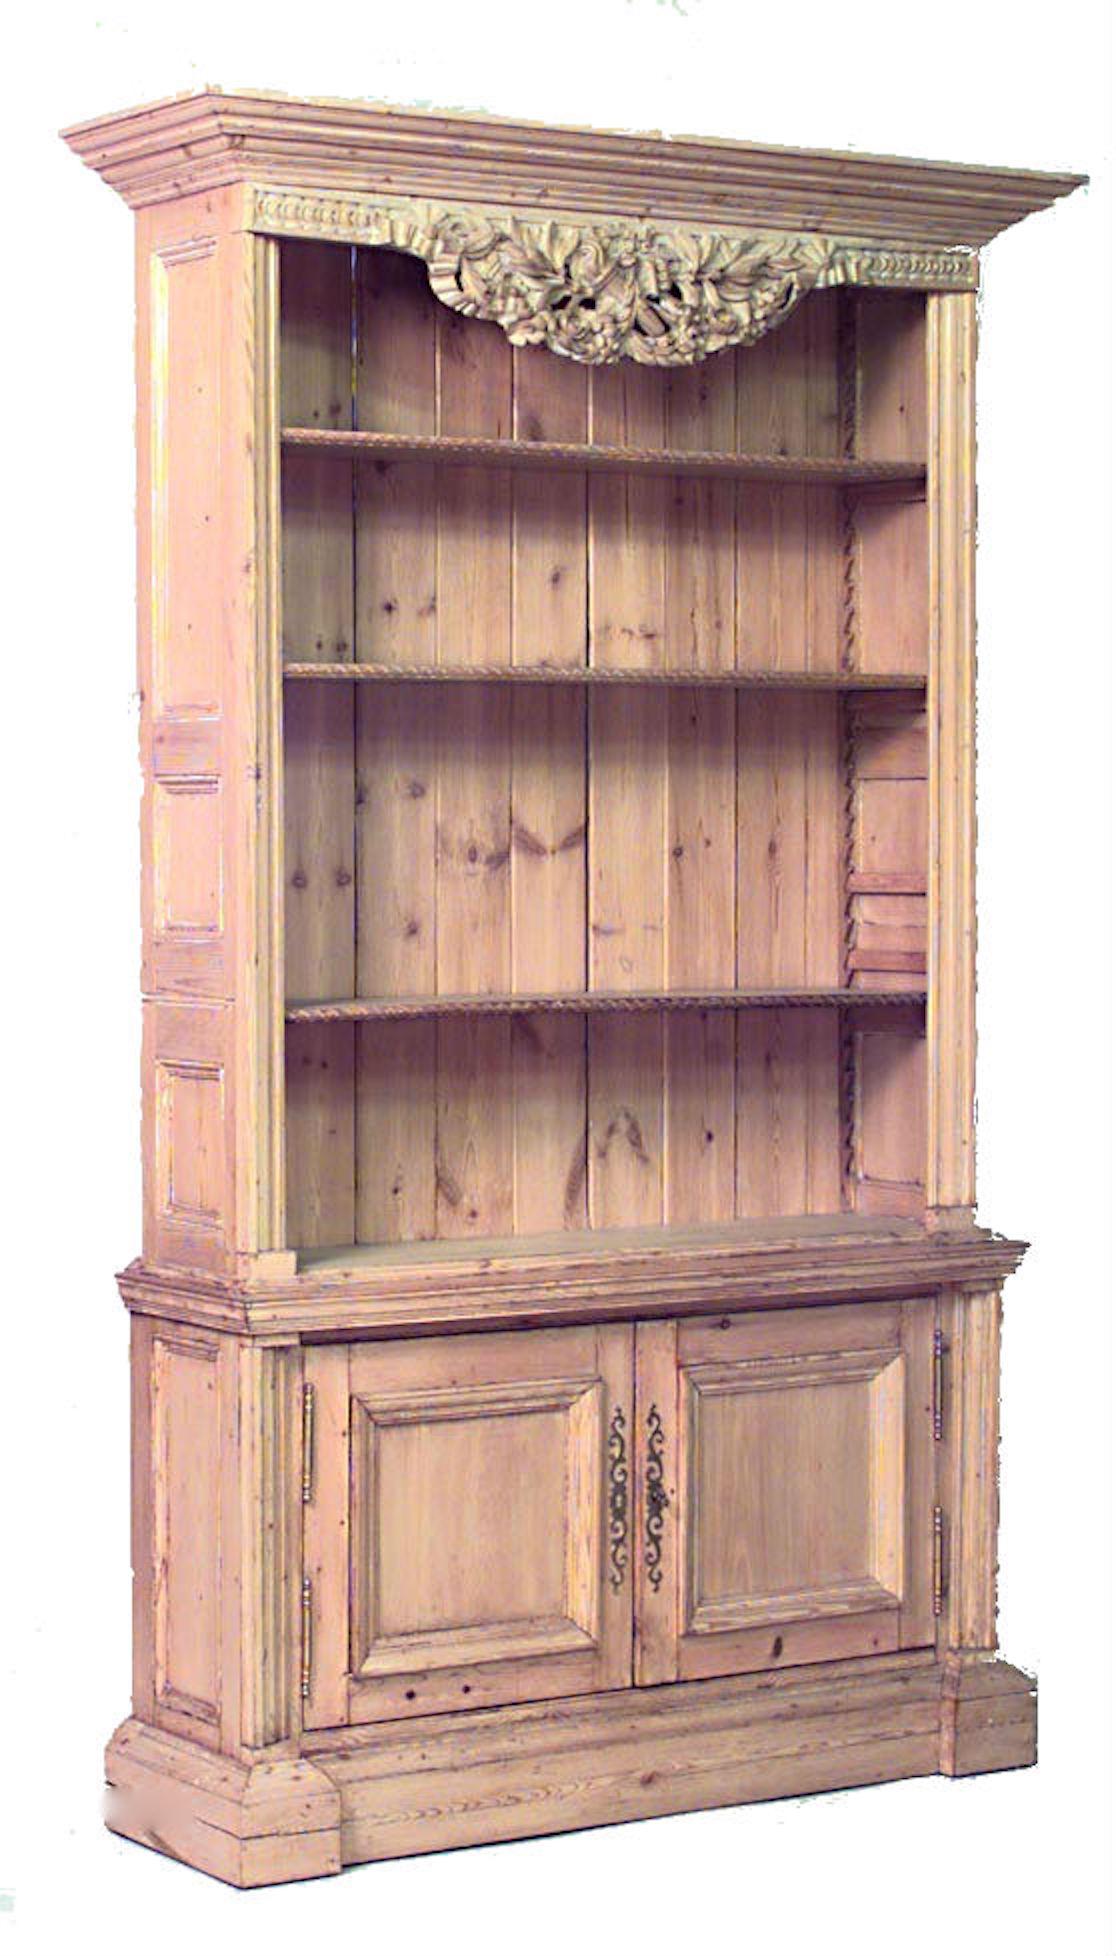 Pair of English Country (19/20th Century) stripped pine bookcase cabinets with open shelves and 2 lower doors with floral carved top. (PRICED AS Pair)
